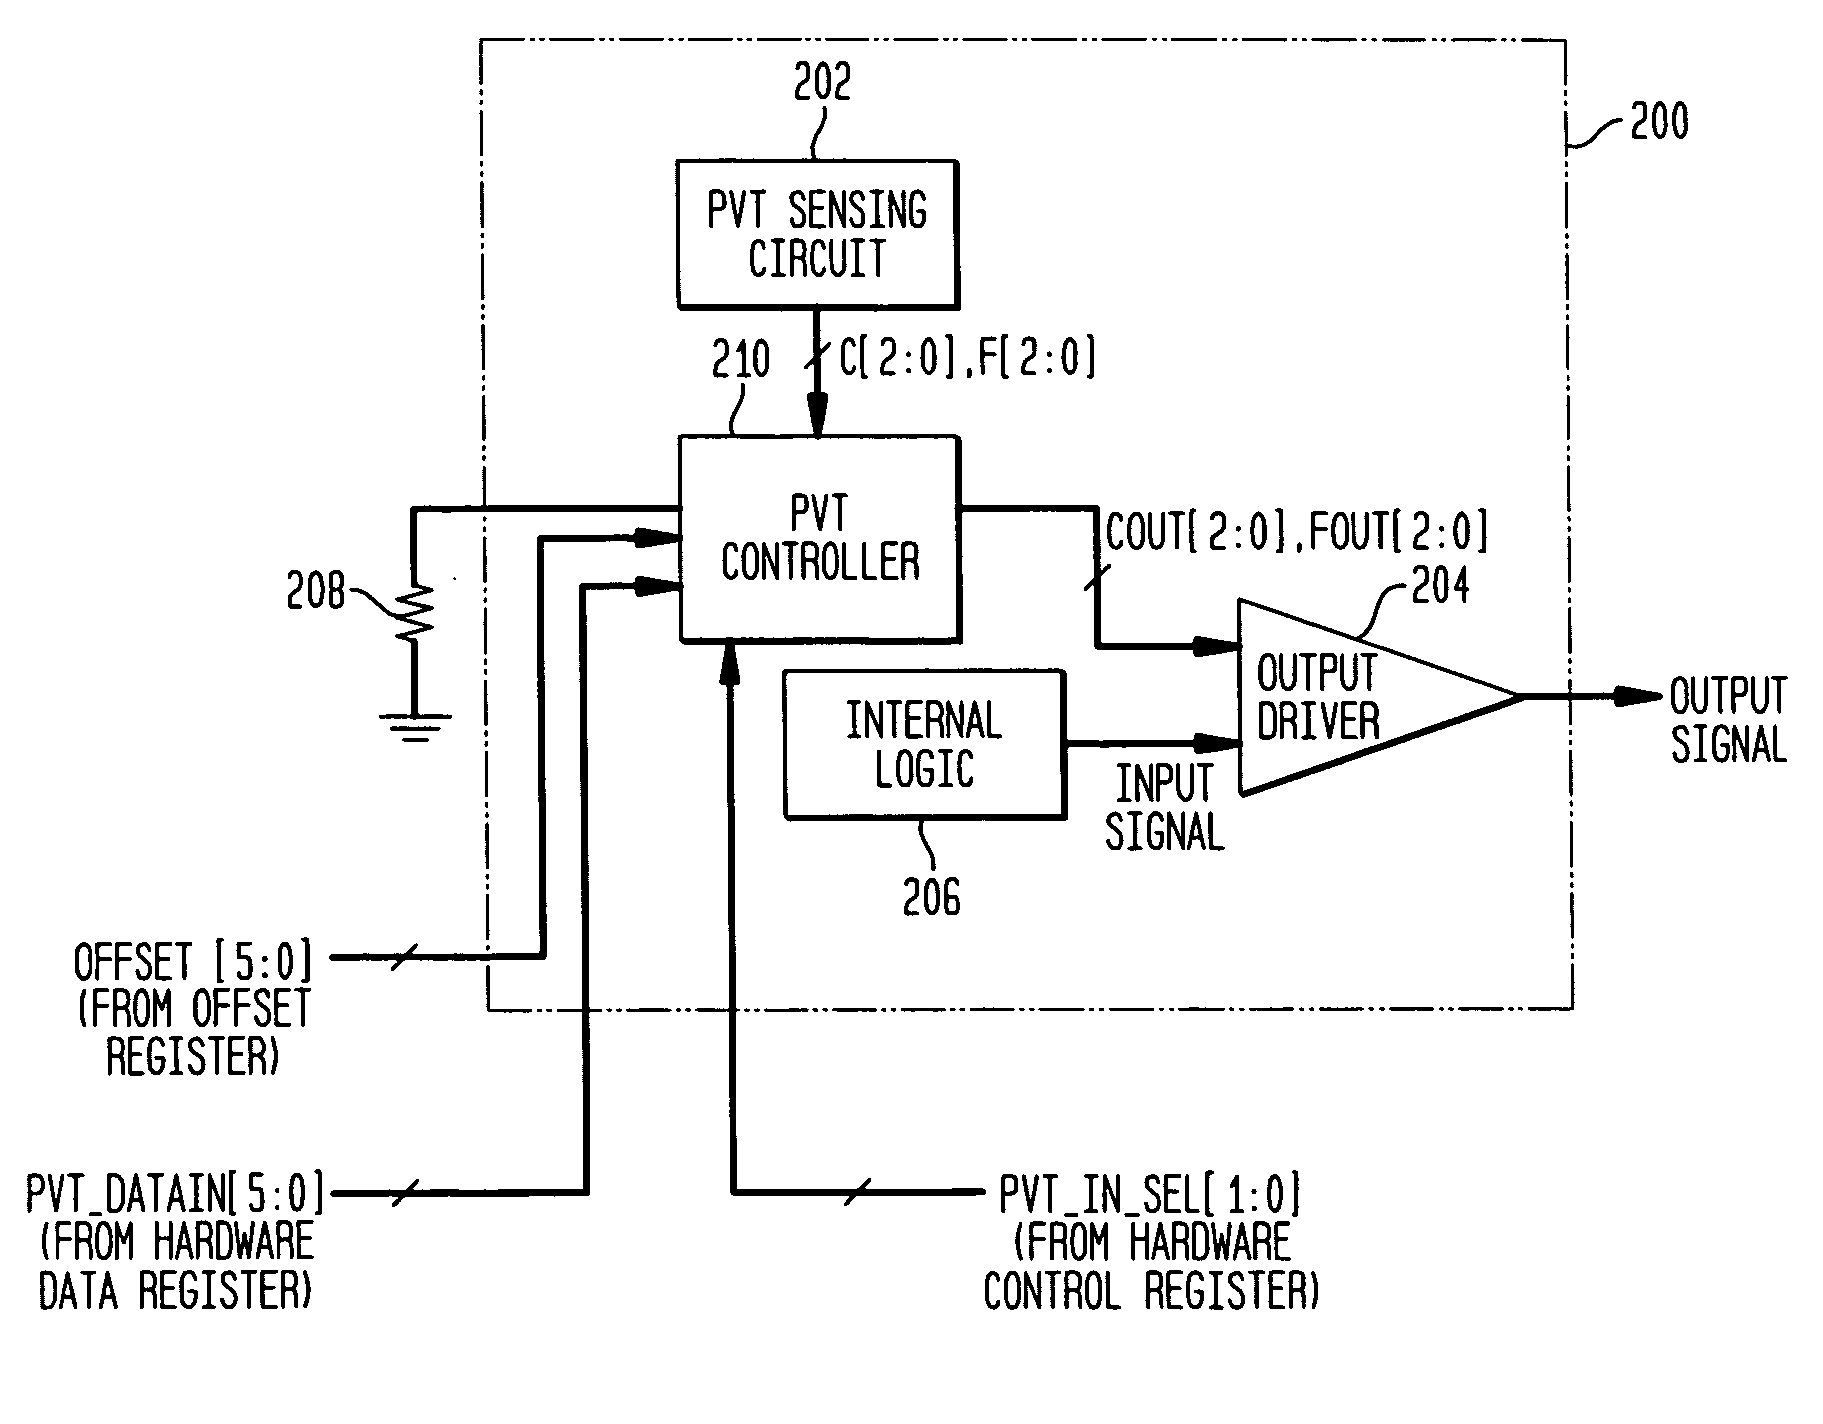 Adjusting settings of an I/O circuit for process, voltage, and/or temperature variations